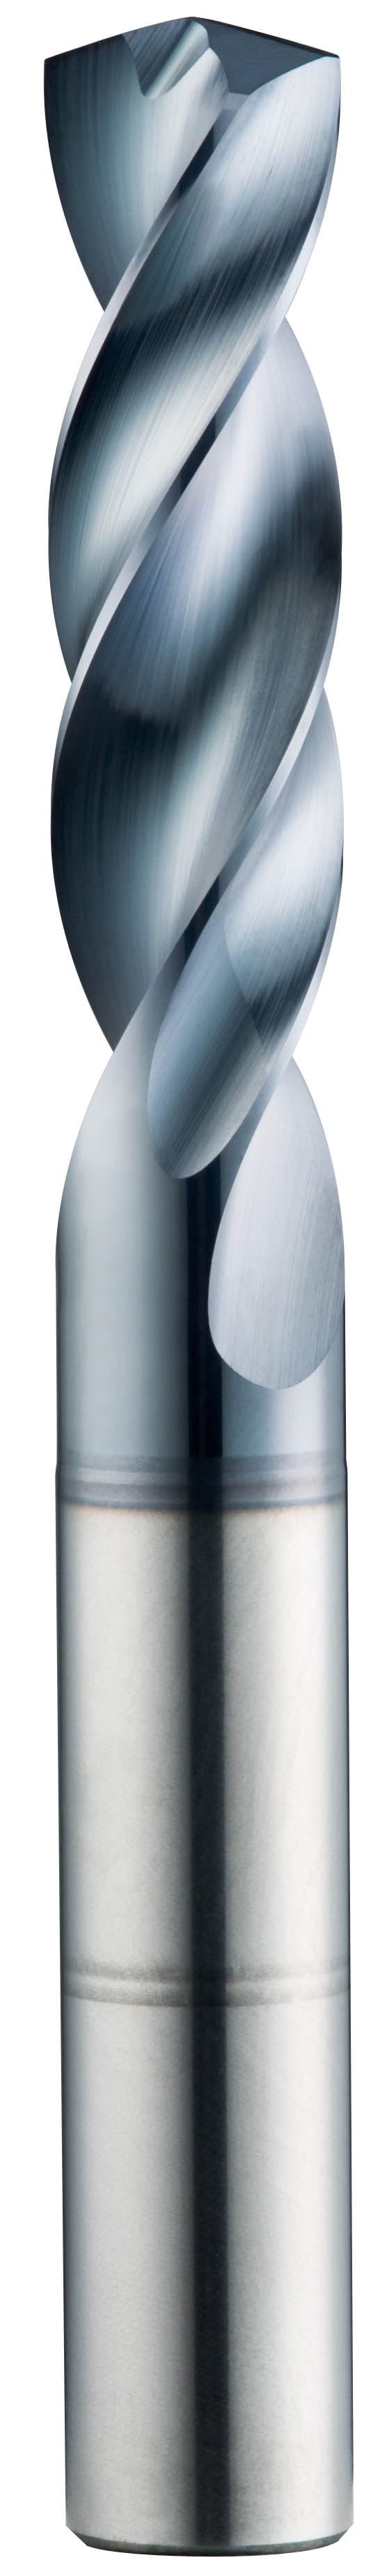 3.50mm Dia, 145 Degree Point, Solid Carbide Drill - 64105